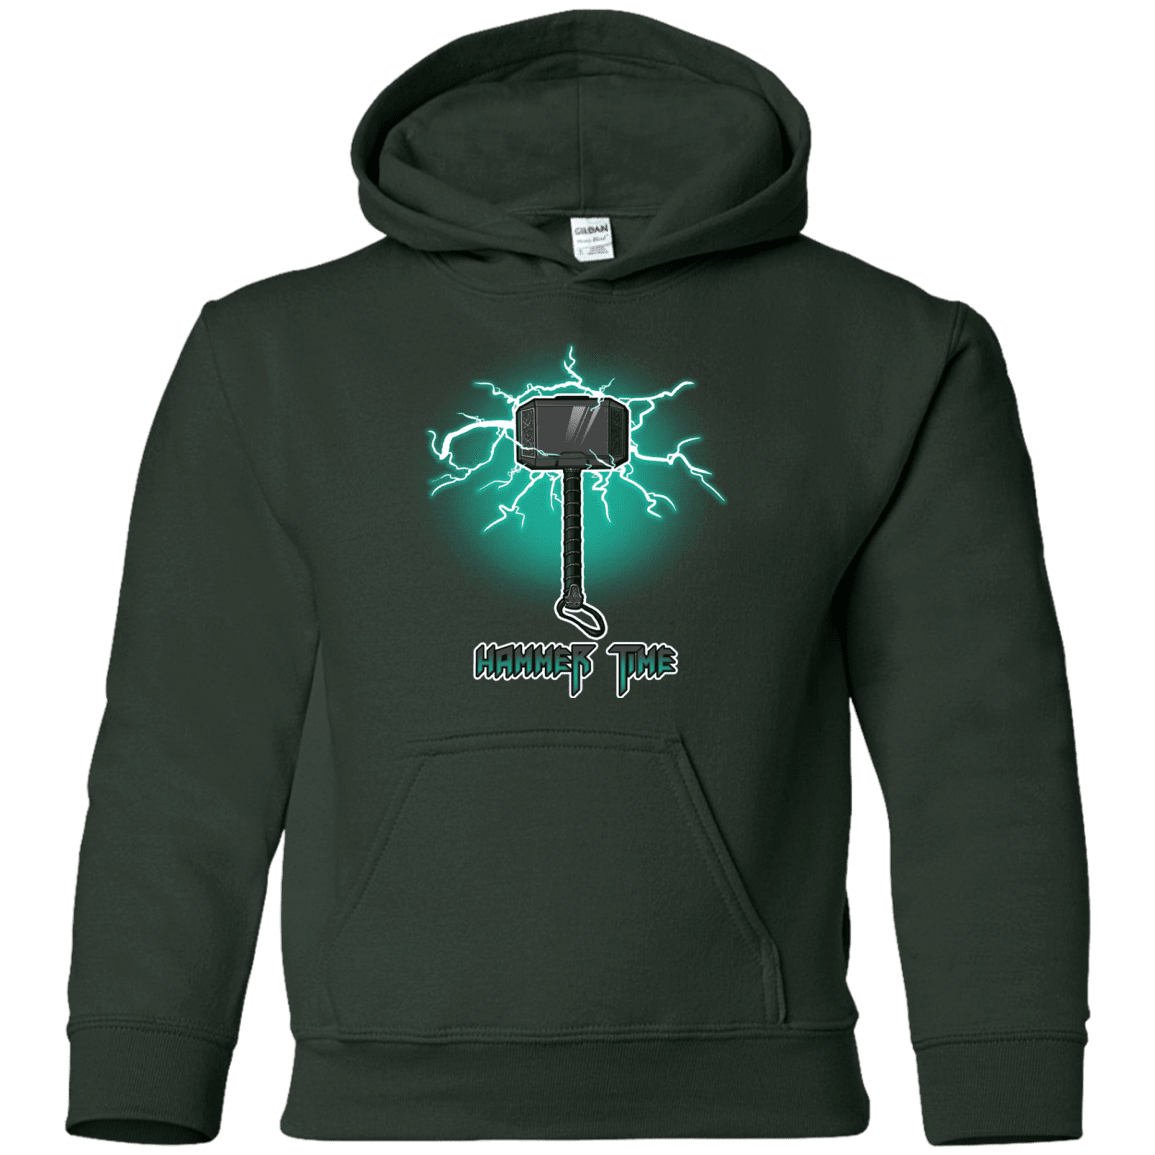 Sweatshirts Forest Green / YS Hammer Time Youth Hoodie